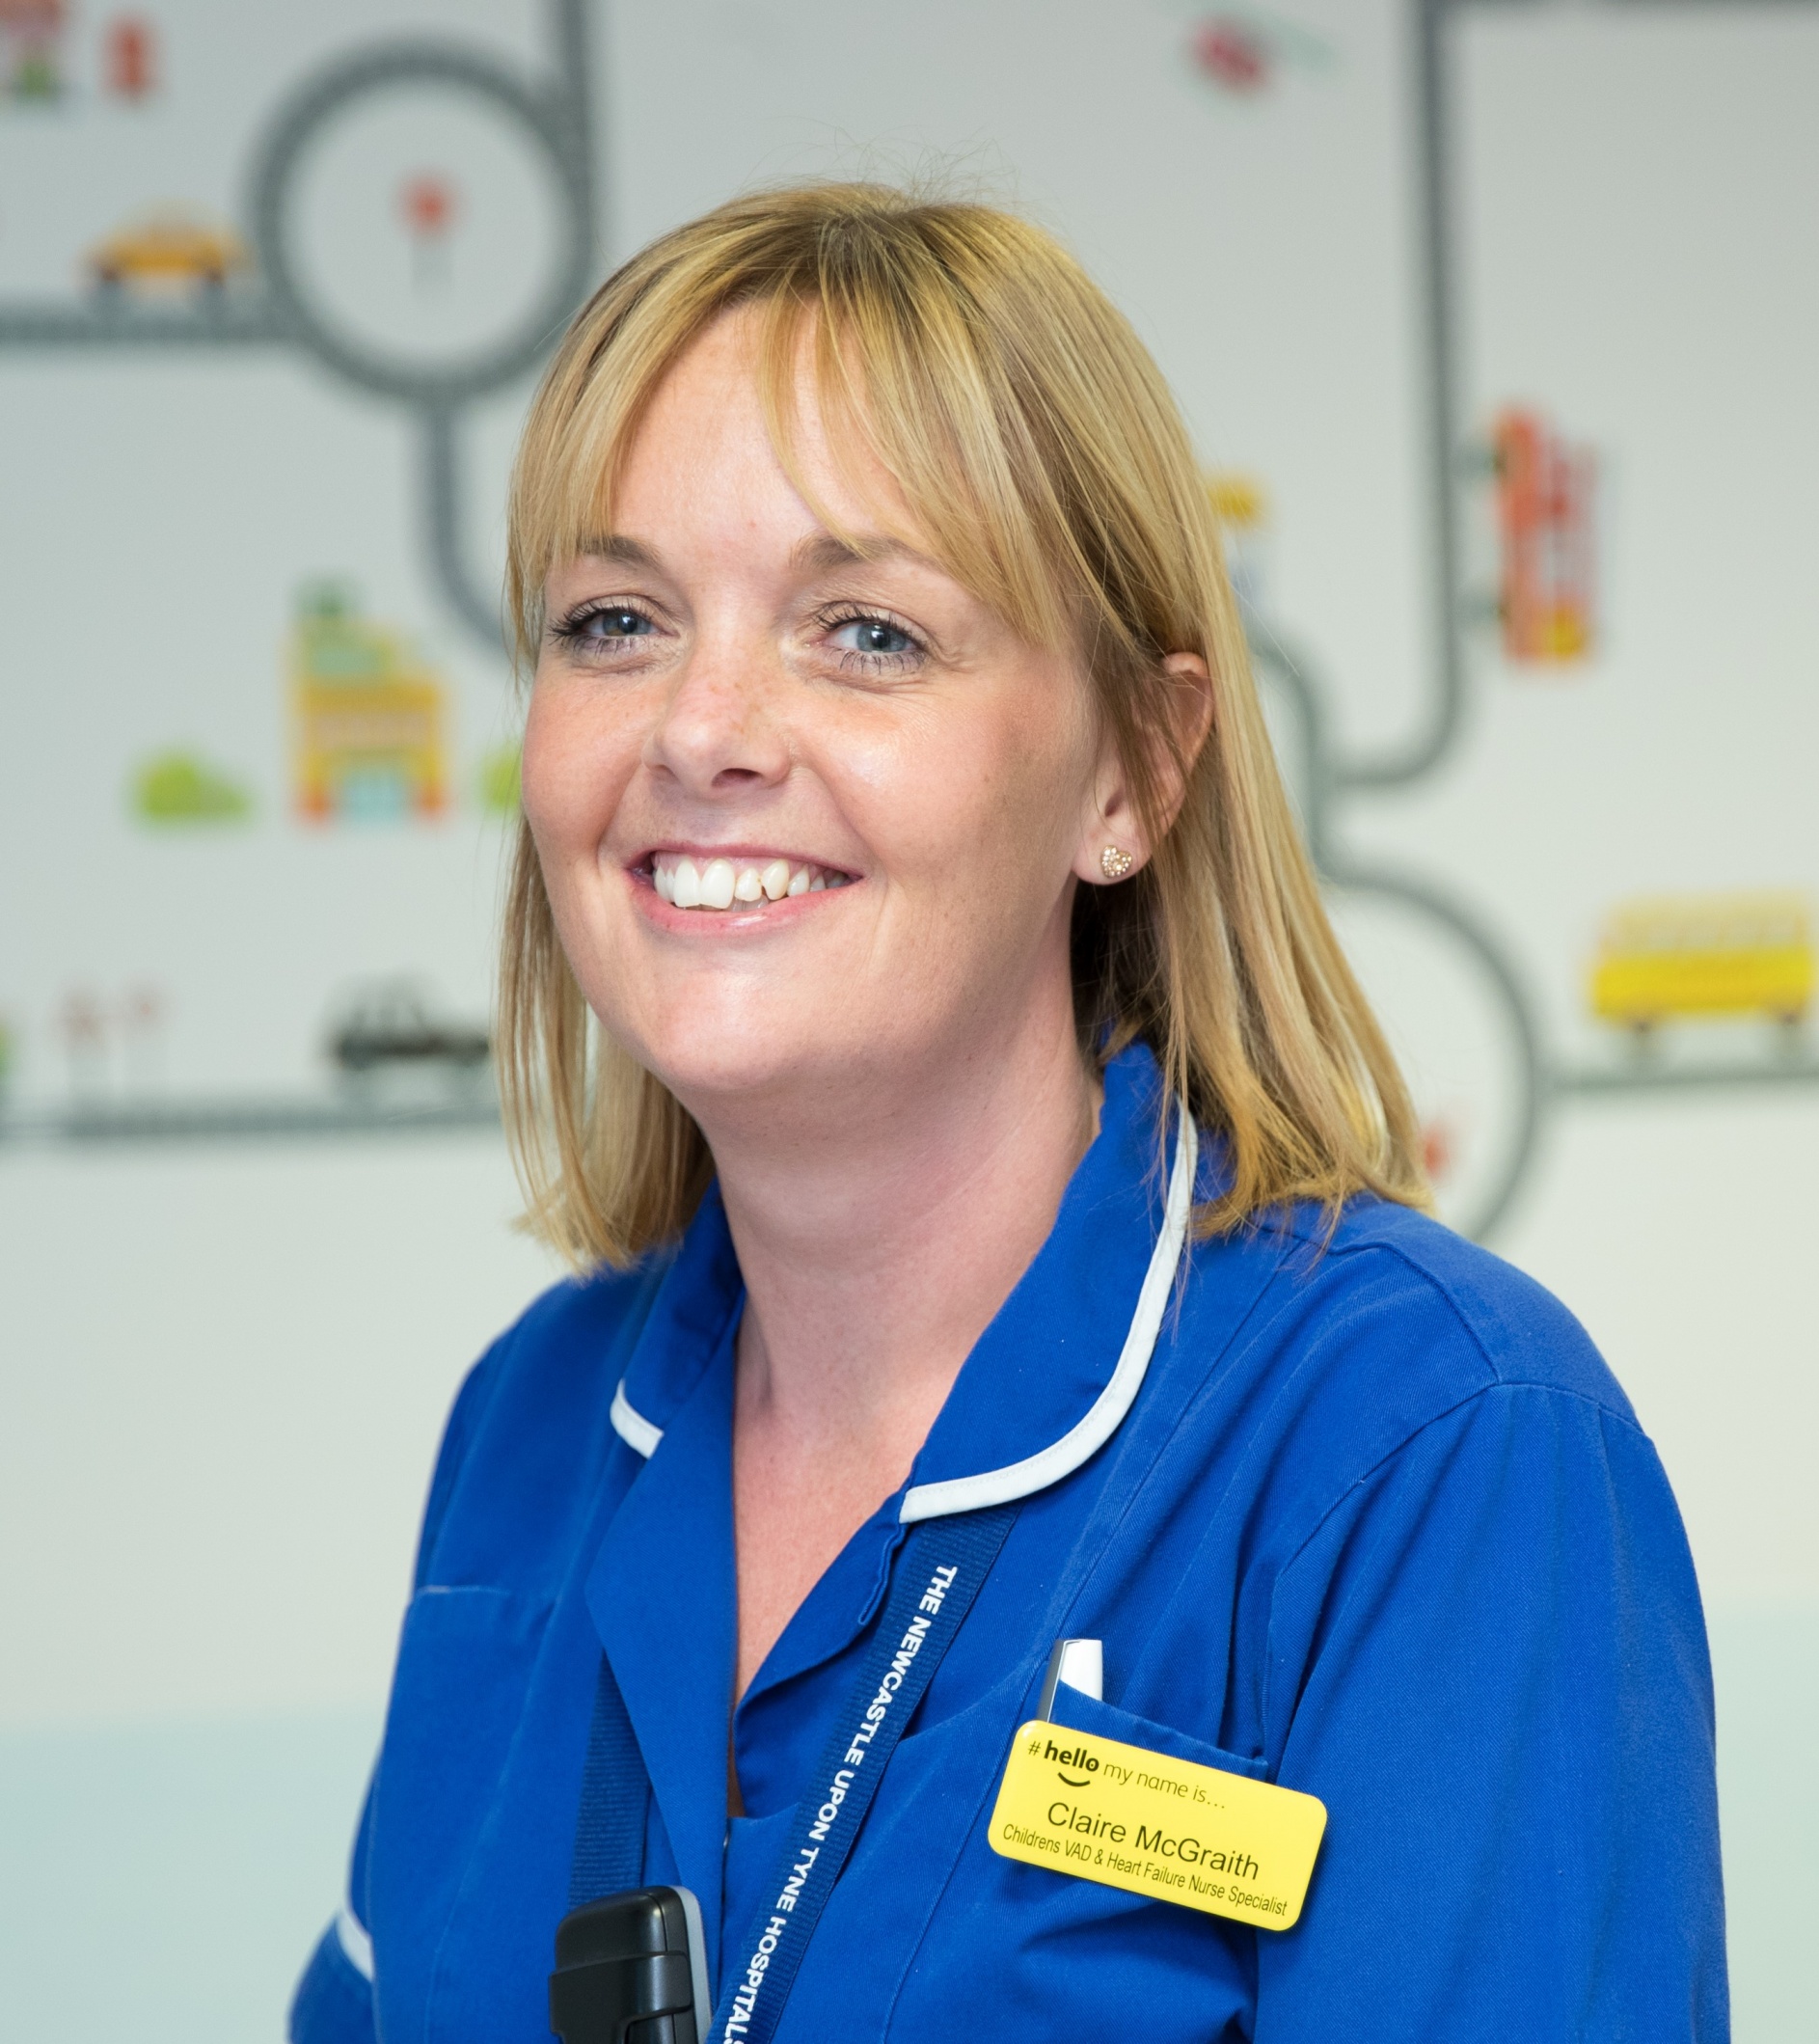 Claire is a specialist VADs nurse